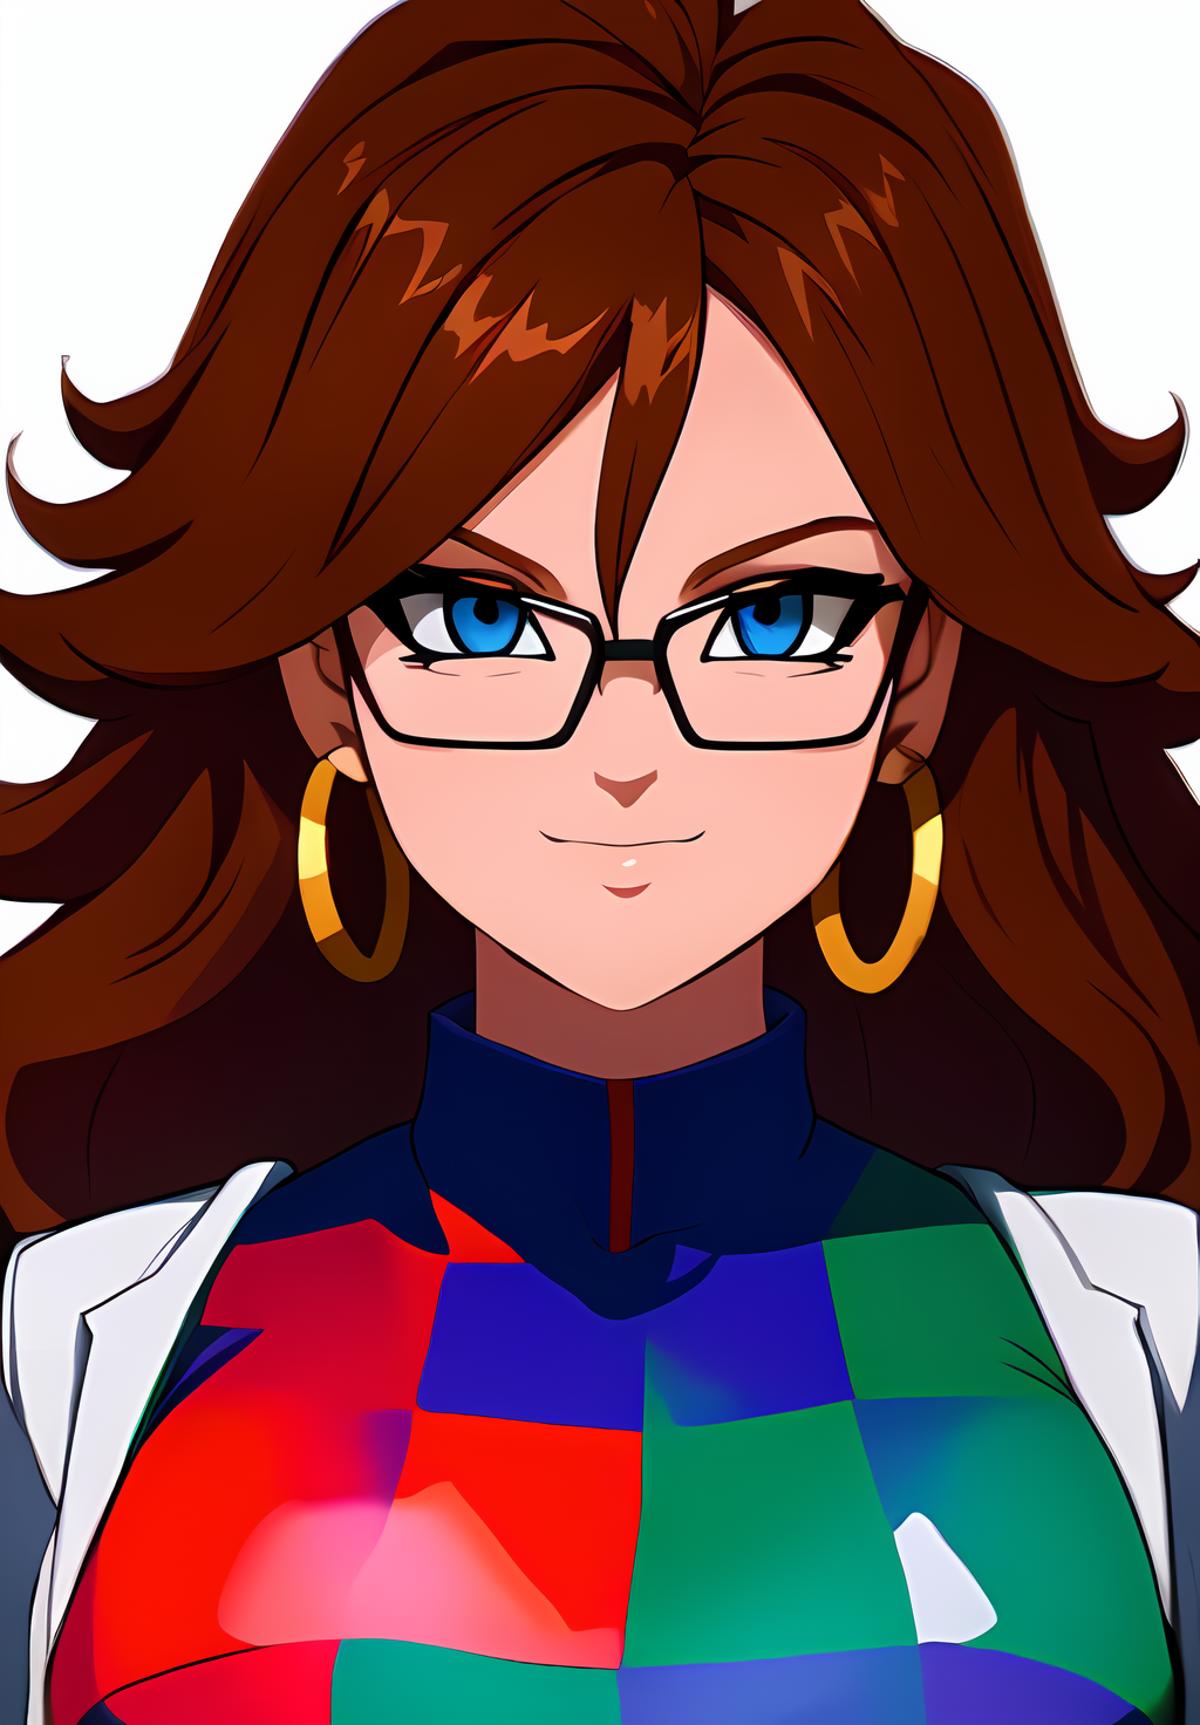 Android 21 - Dragon Ball image by AsaTyr